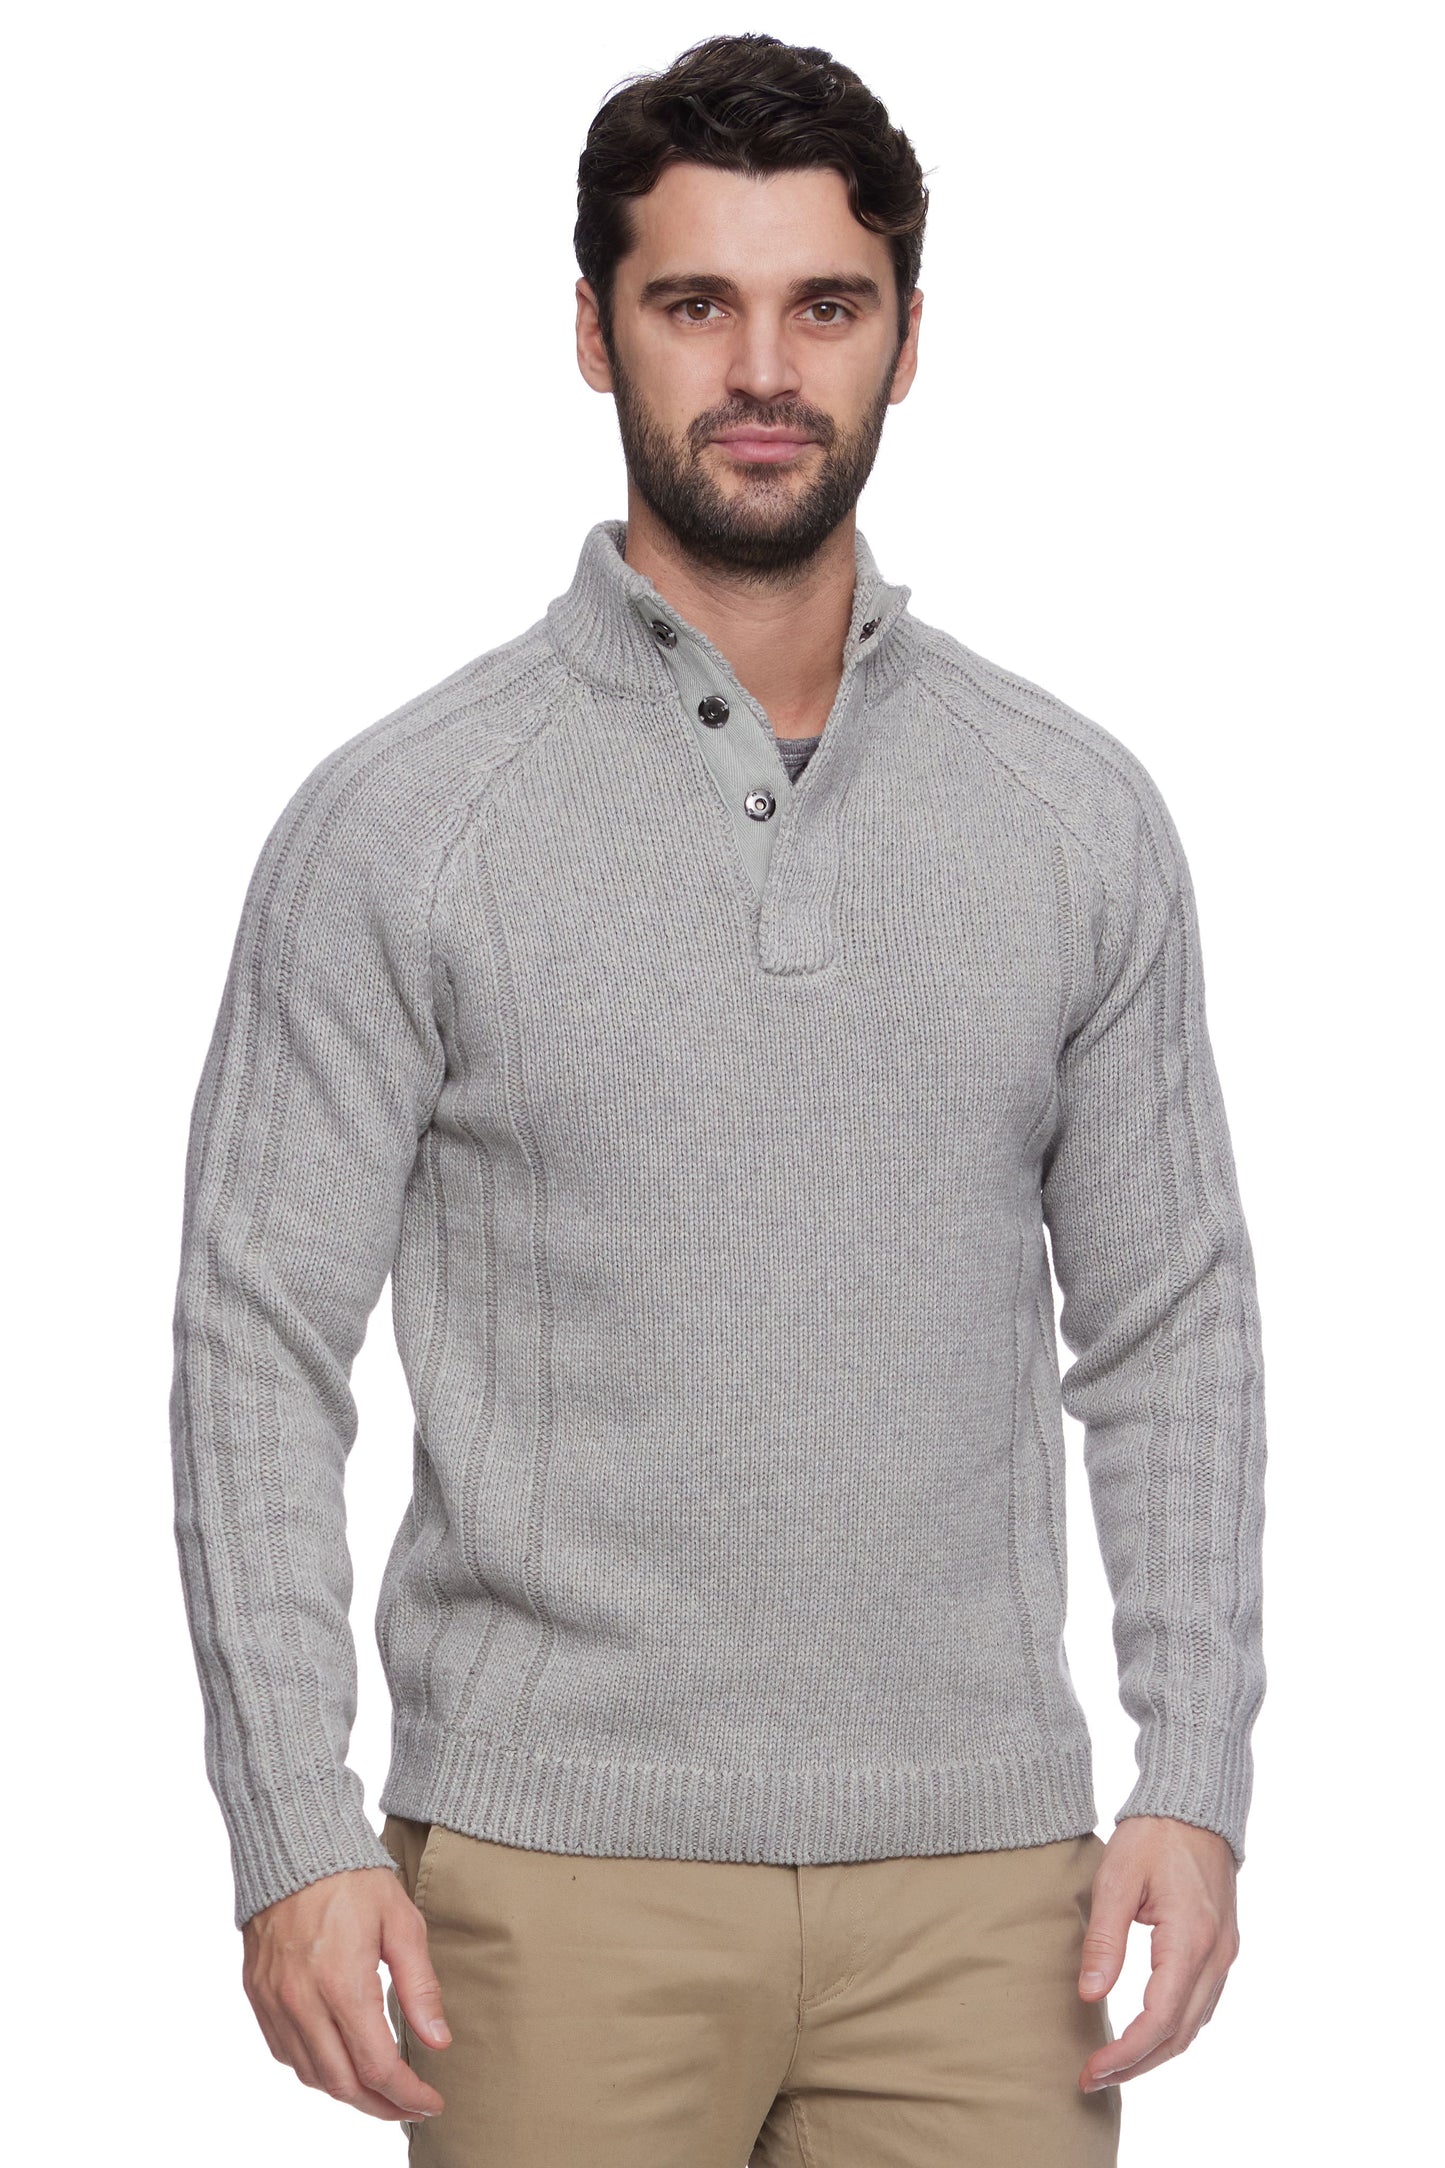 Plaineview Mock Neck Sweater | Oatmeal heather